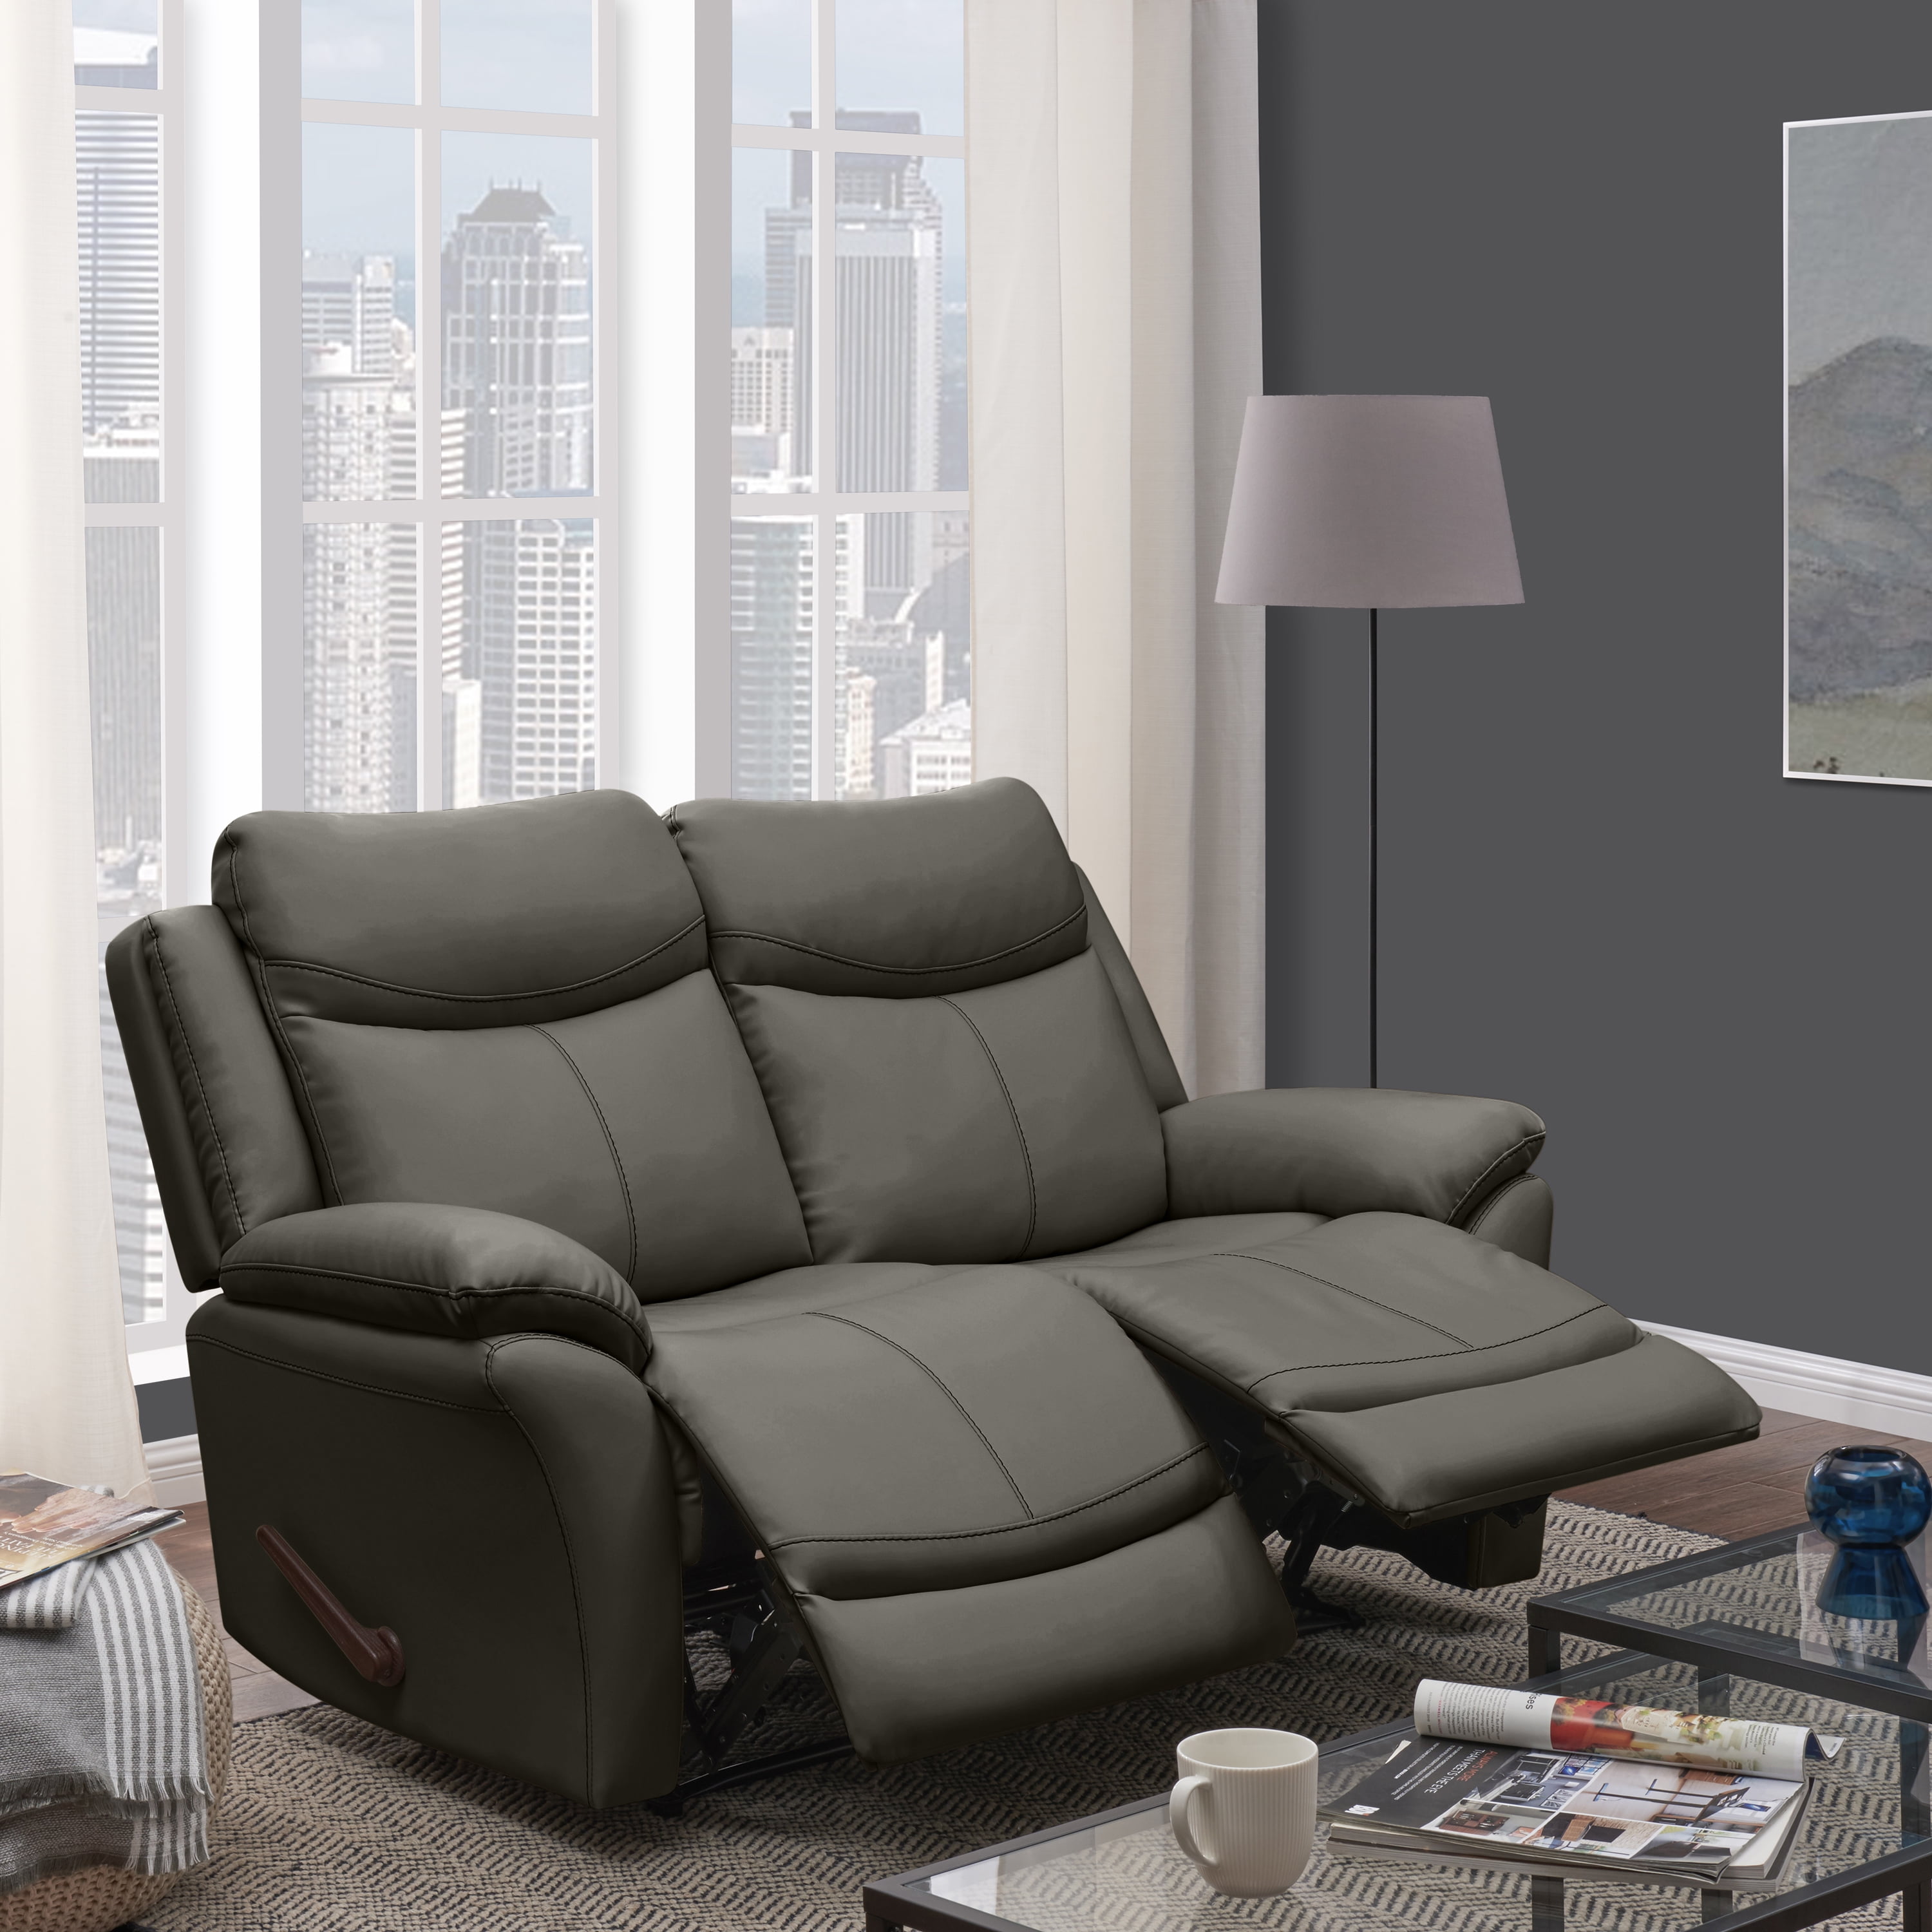 Homesvale Wall Hugger Recliner Loveseat Taupe Gray Faux Leather